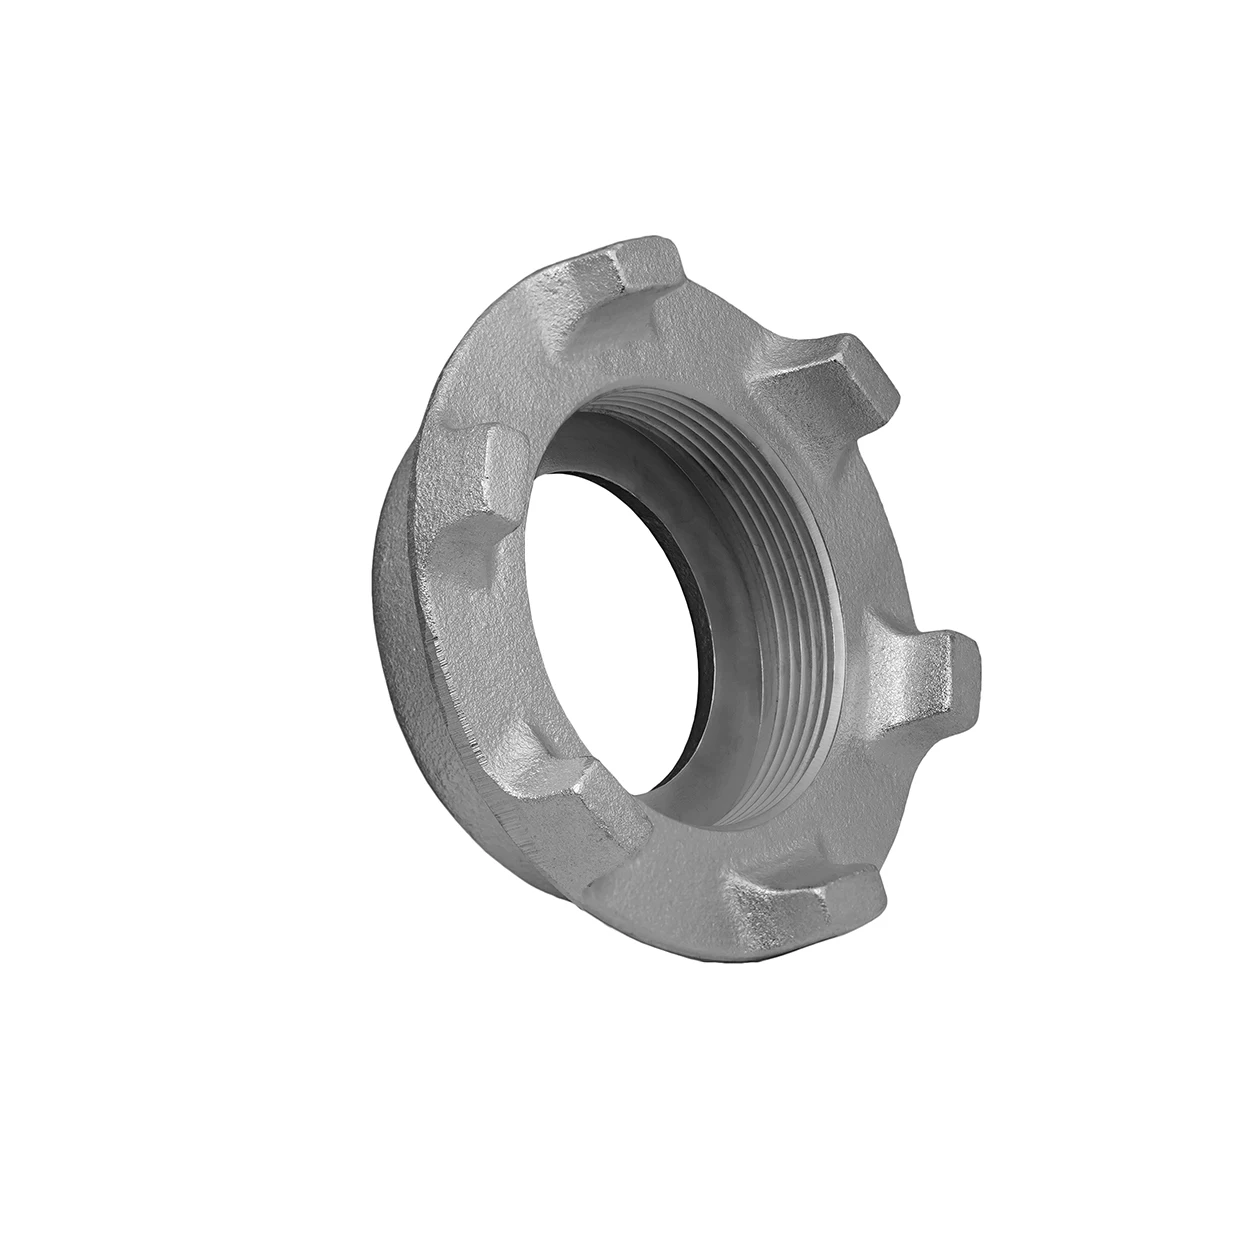 Replacement Ring #32 Meat Grinder,Butcher Series Retaining Ring for BSG32 Meat Grinders,Replacement Ring Nut for Meat Grinder